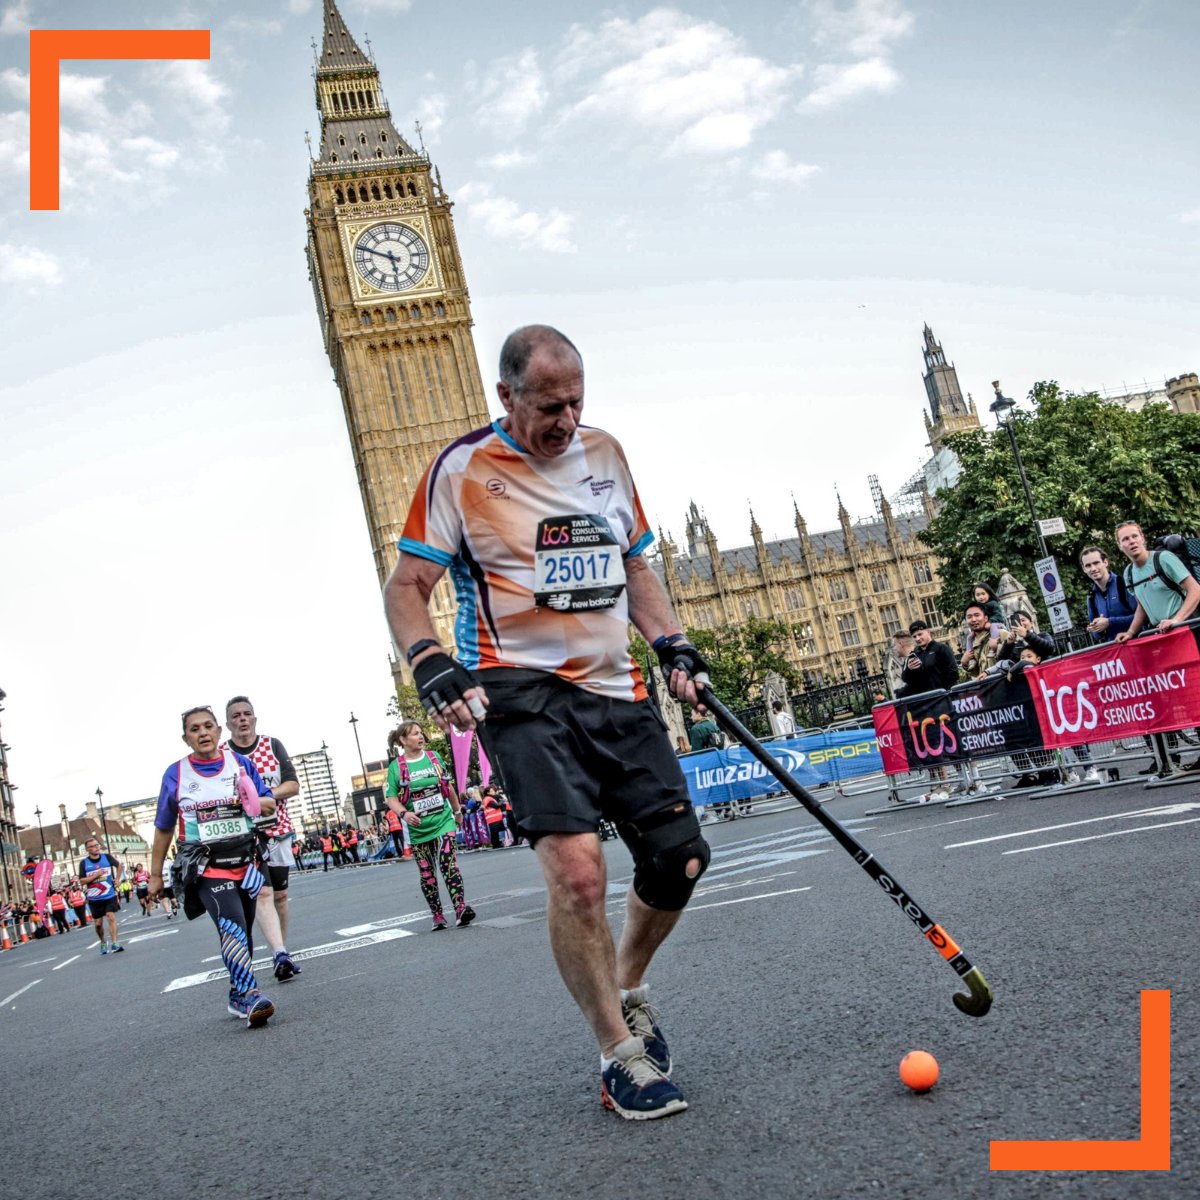 Dribbling a hockey ball AND running the @LondonMarathon! That's what Andy's doing #ForACure for a 2nd time on Sunday 21 April. Our cheer squad will be there rooting for you every tap of the way! Let's help Andy reach his £2,000 target: bit.ly/3PVeh0U #LondonMarathon